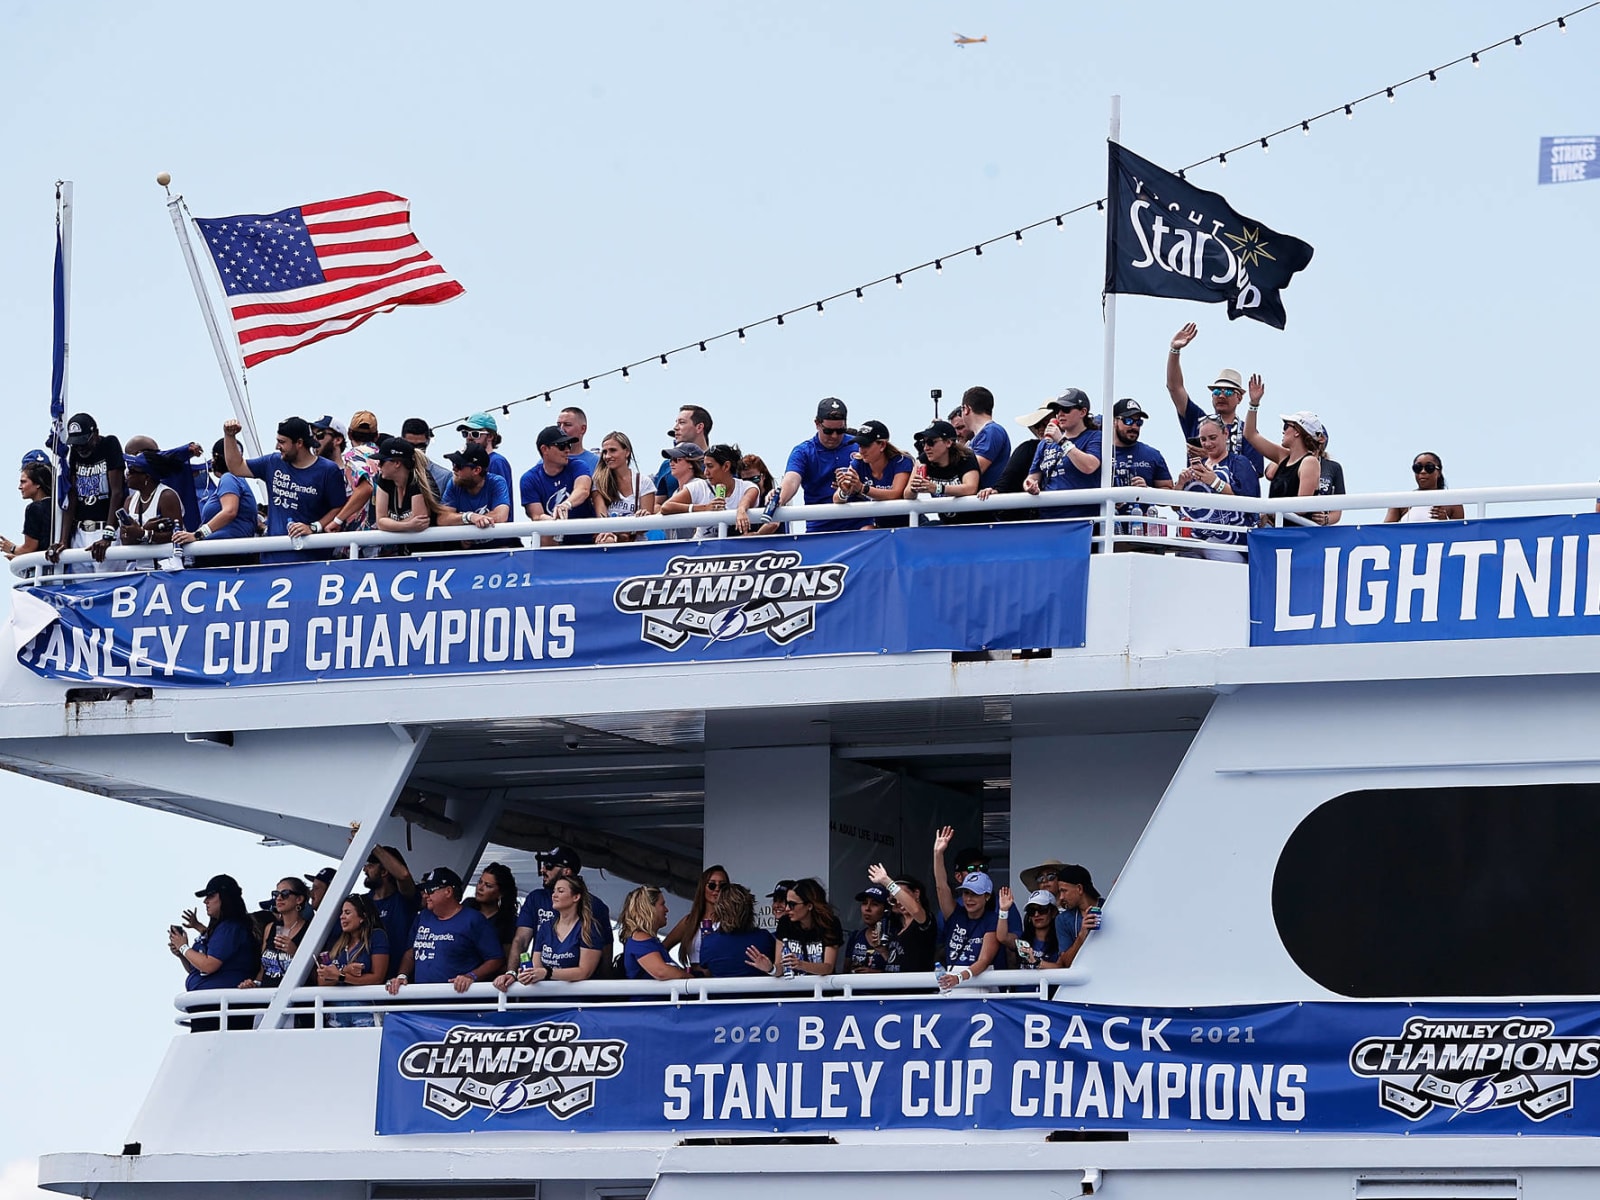 Watch: Best moments from Lightning's legendary boat parade